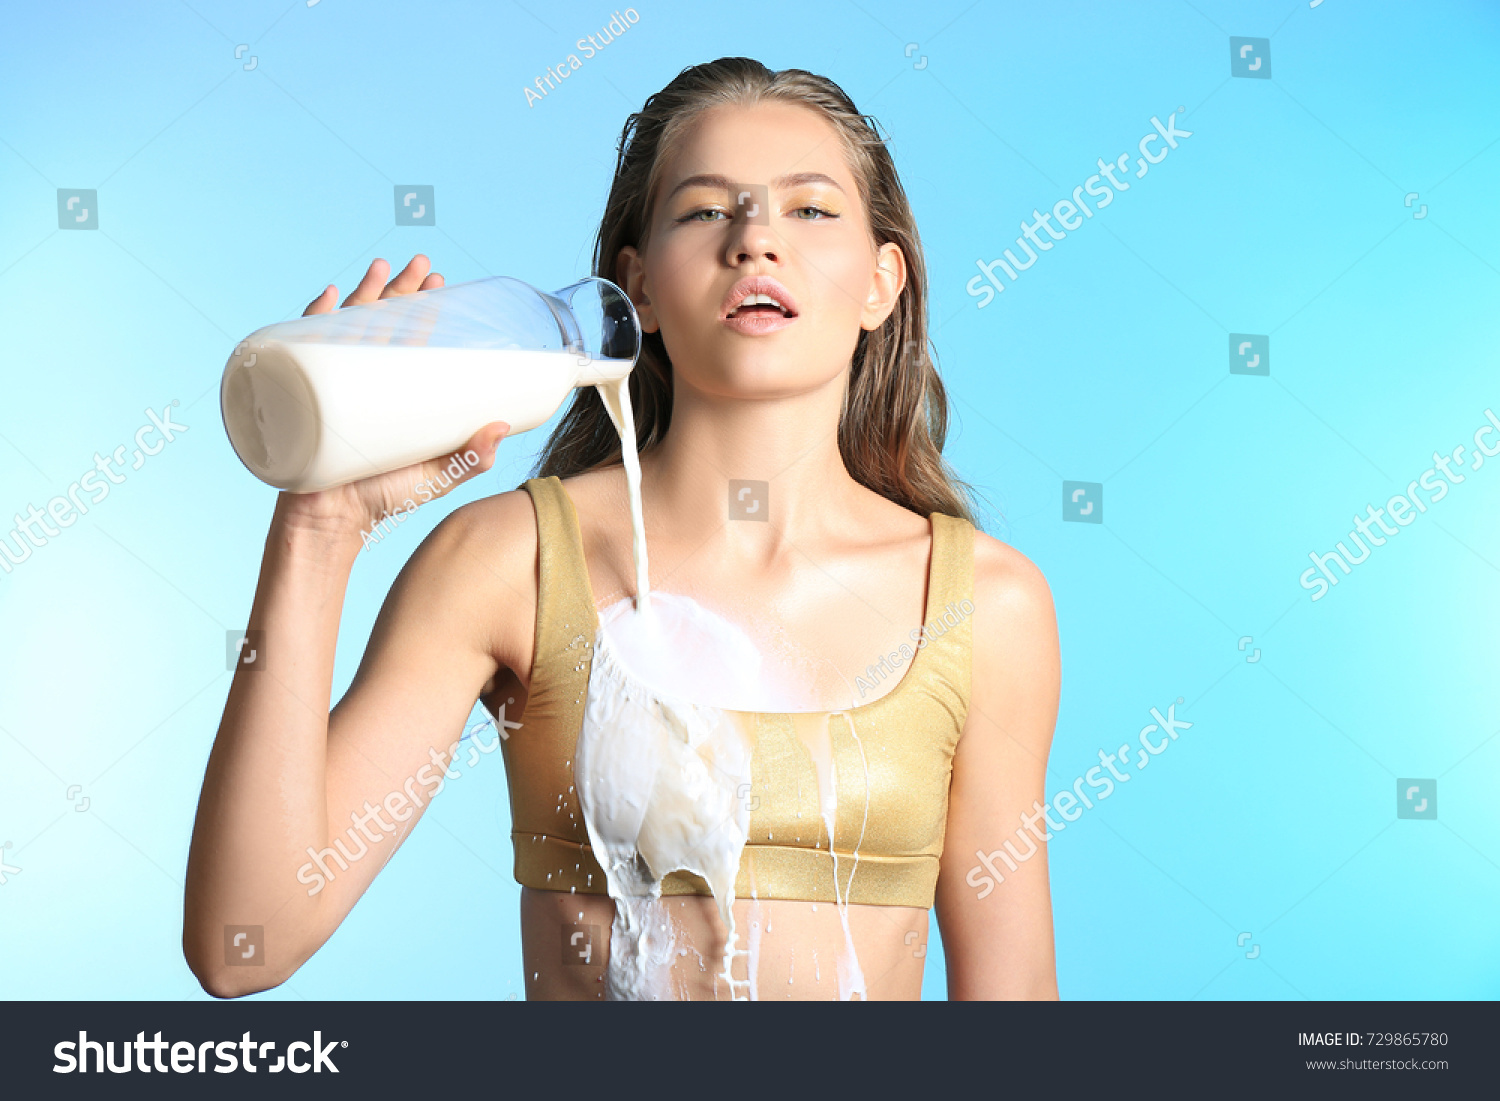 Girl Pouring Milk On Herself